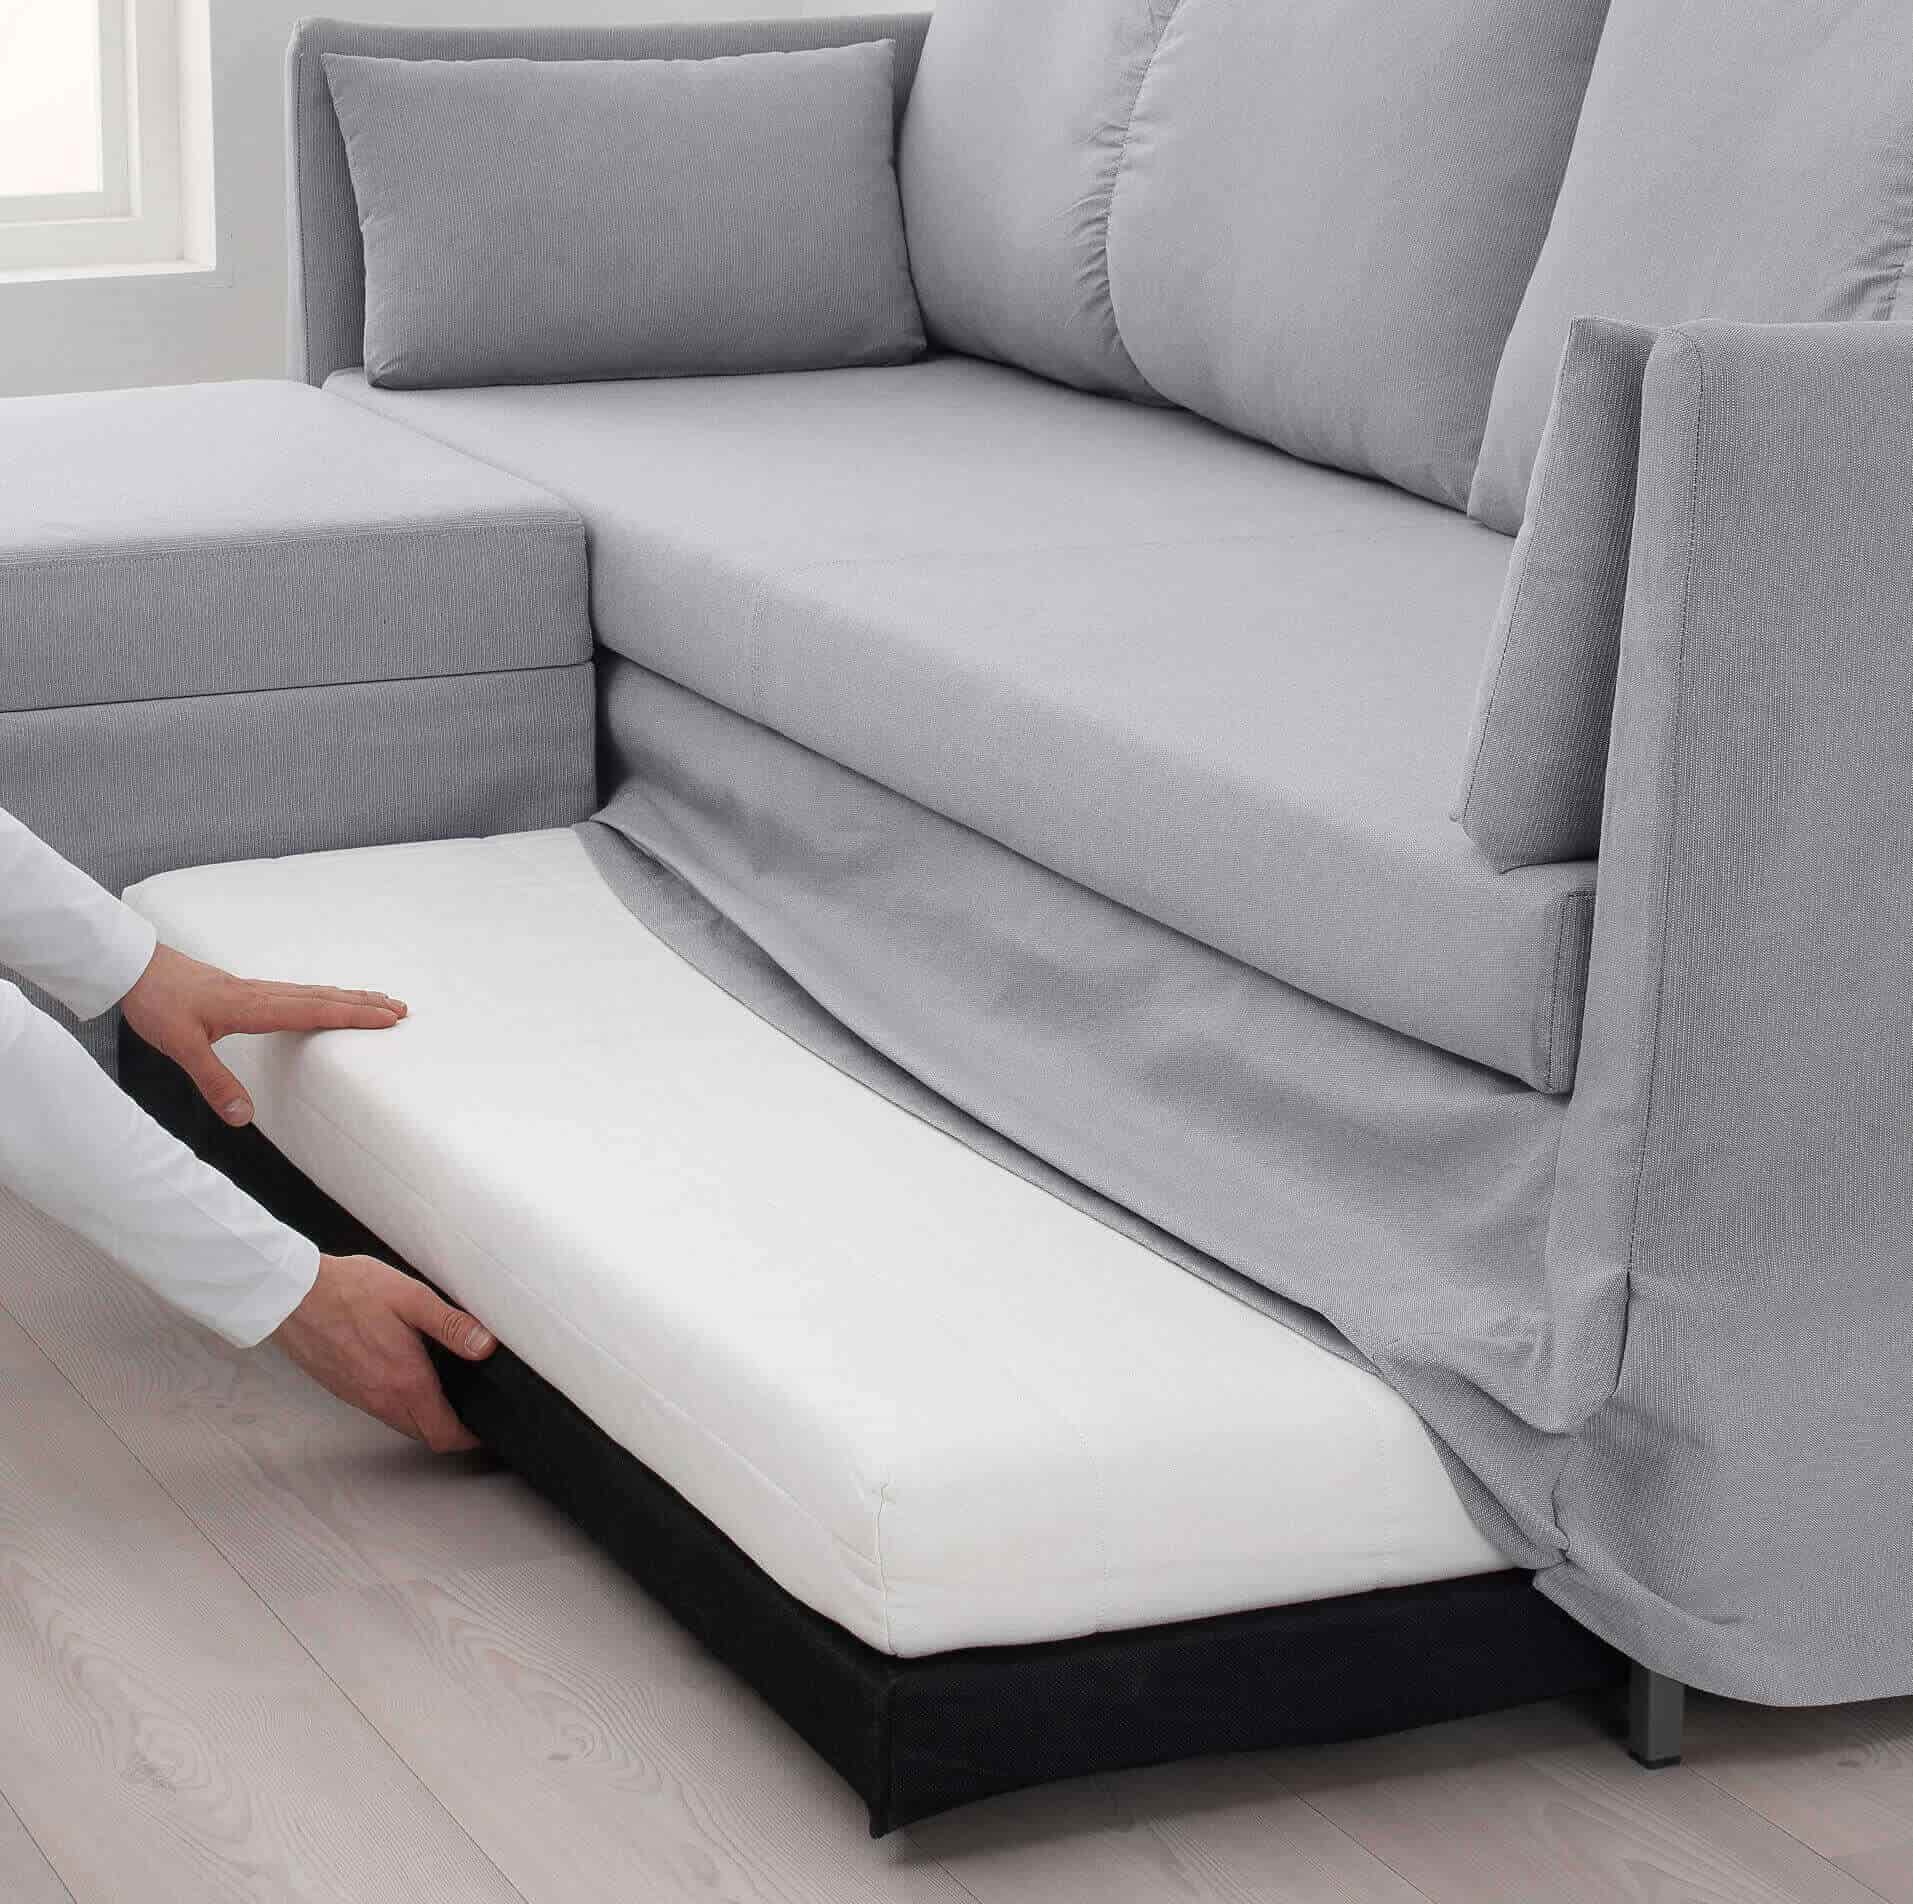 Affordable Futon Beds For Flexible Seating And Sleeping